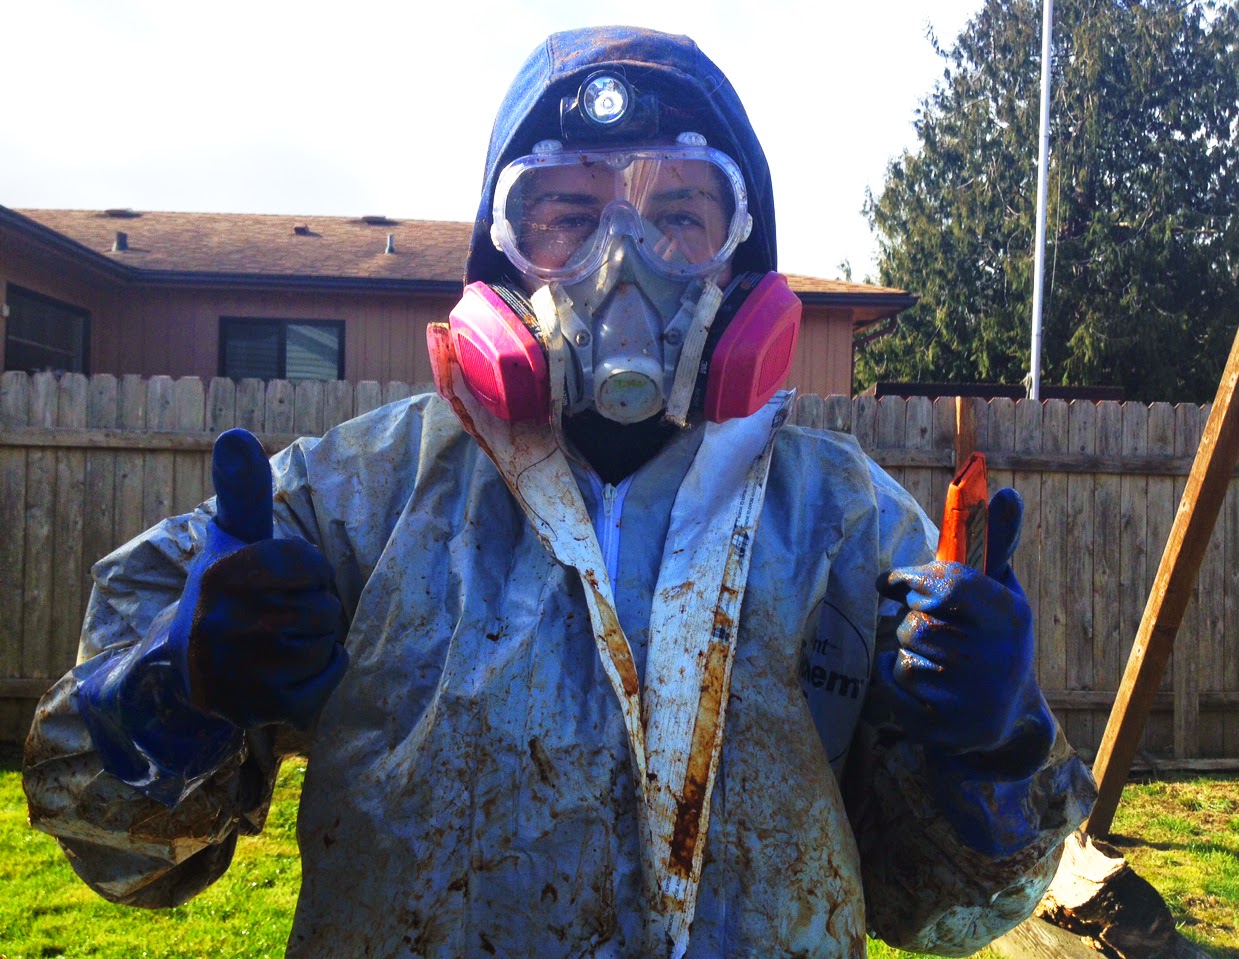 An AmeriCorps member wearing a respirator mask and a protective suit gives a "thumbs up" after a day in the field.